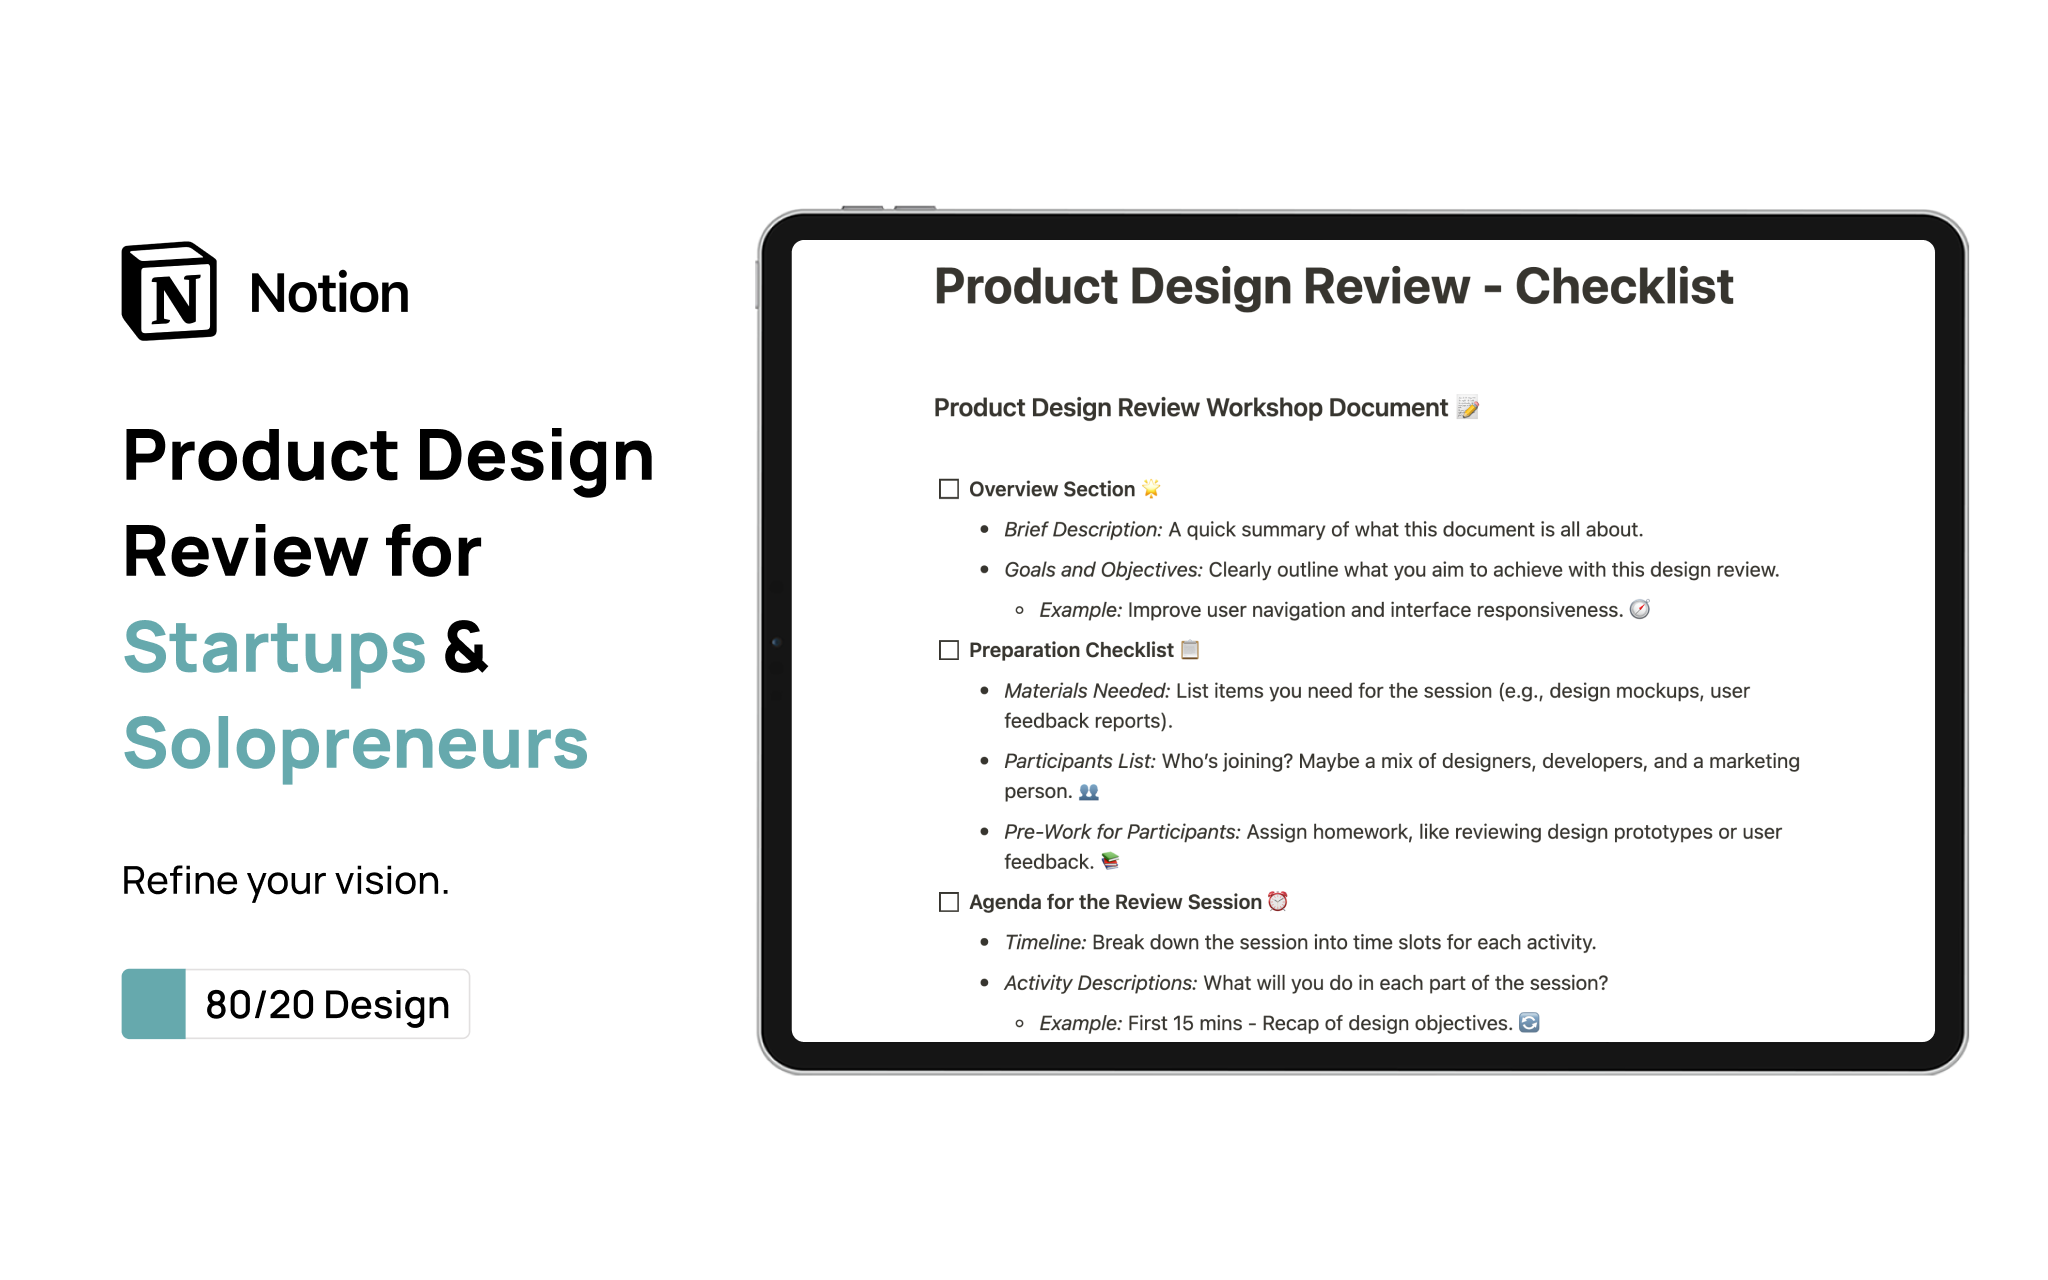 Boost your product's appeal with 80/20 Design's ✅ Product Design Review. Tailored for solopreneurs and startups, it offers key design insights and tips 🖌️.
Discover more at www.8020d.com.